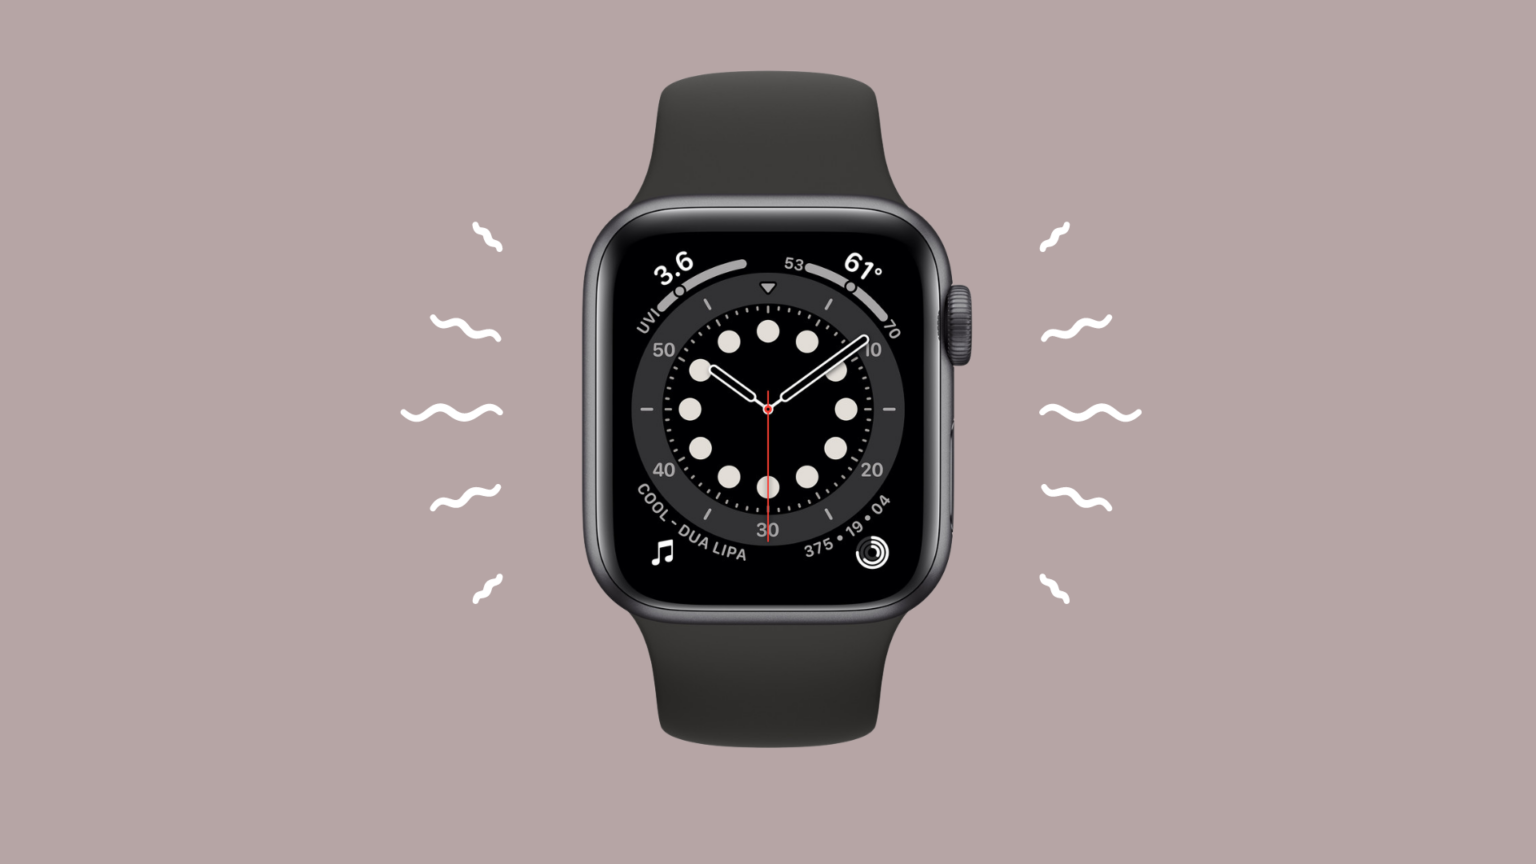 Why is My Apple Watch Vibrating but not Showing Notifications